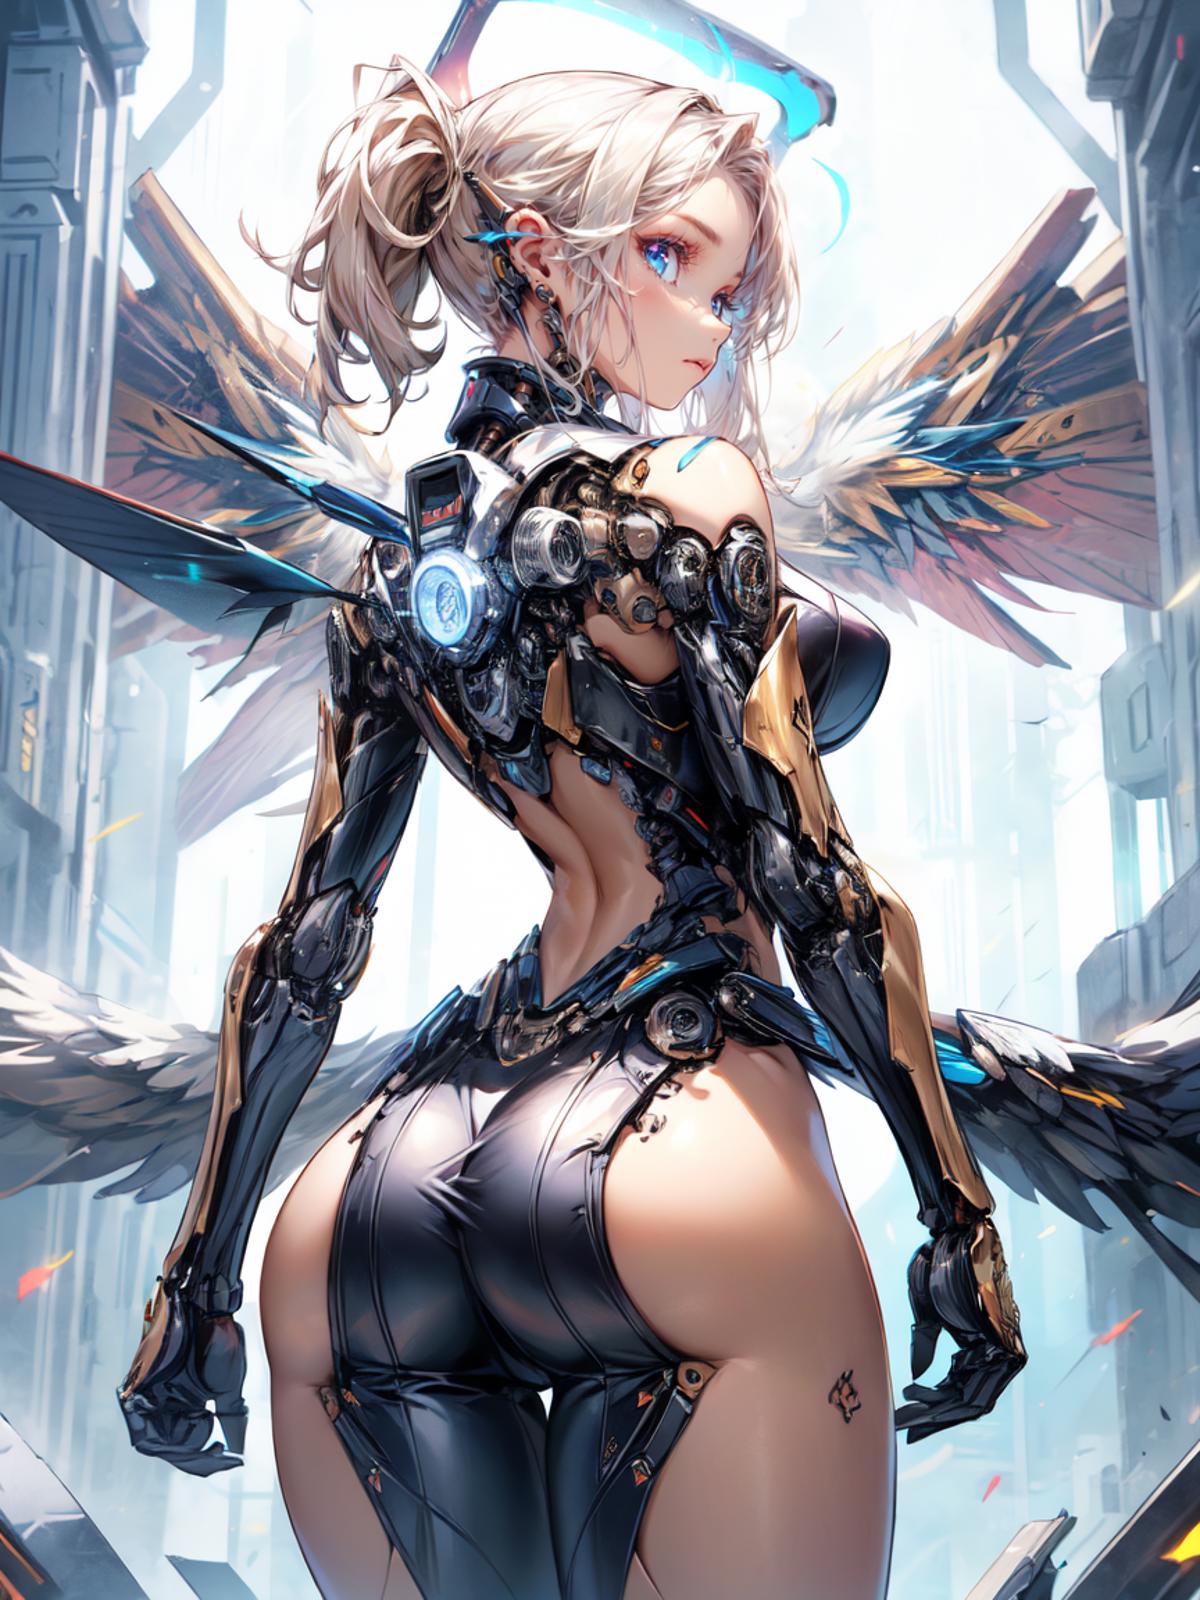 Anime-inspired robotic woman with wings and armor, wearing a skimpy costume.